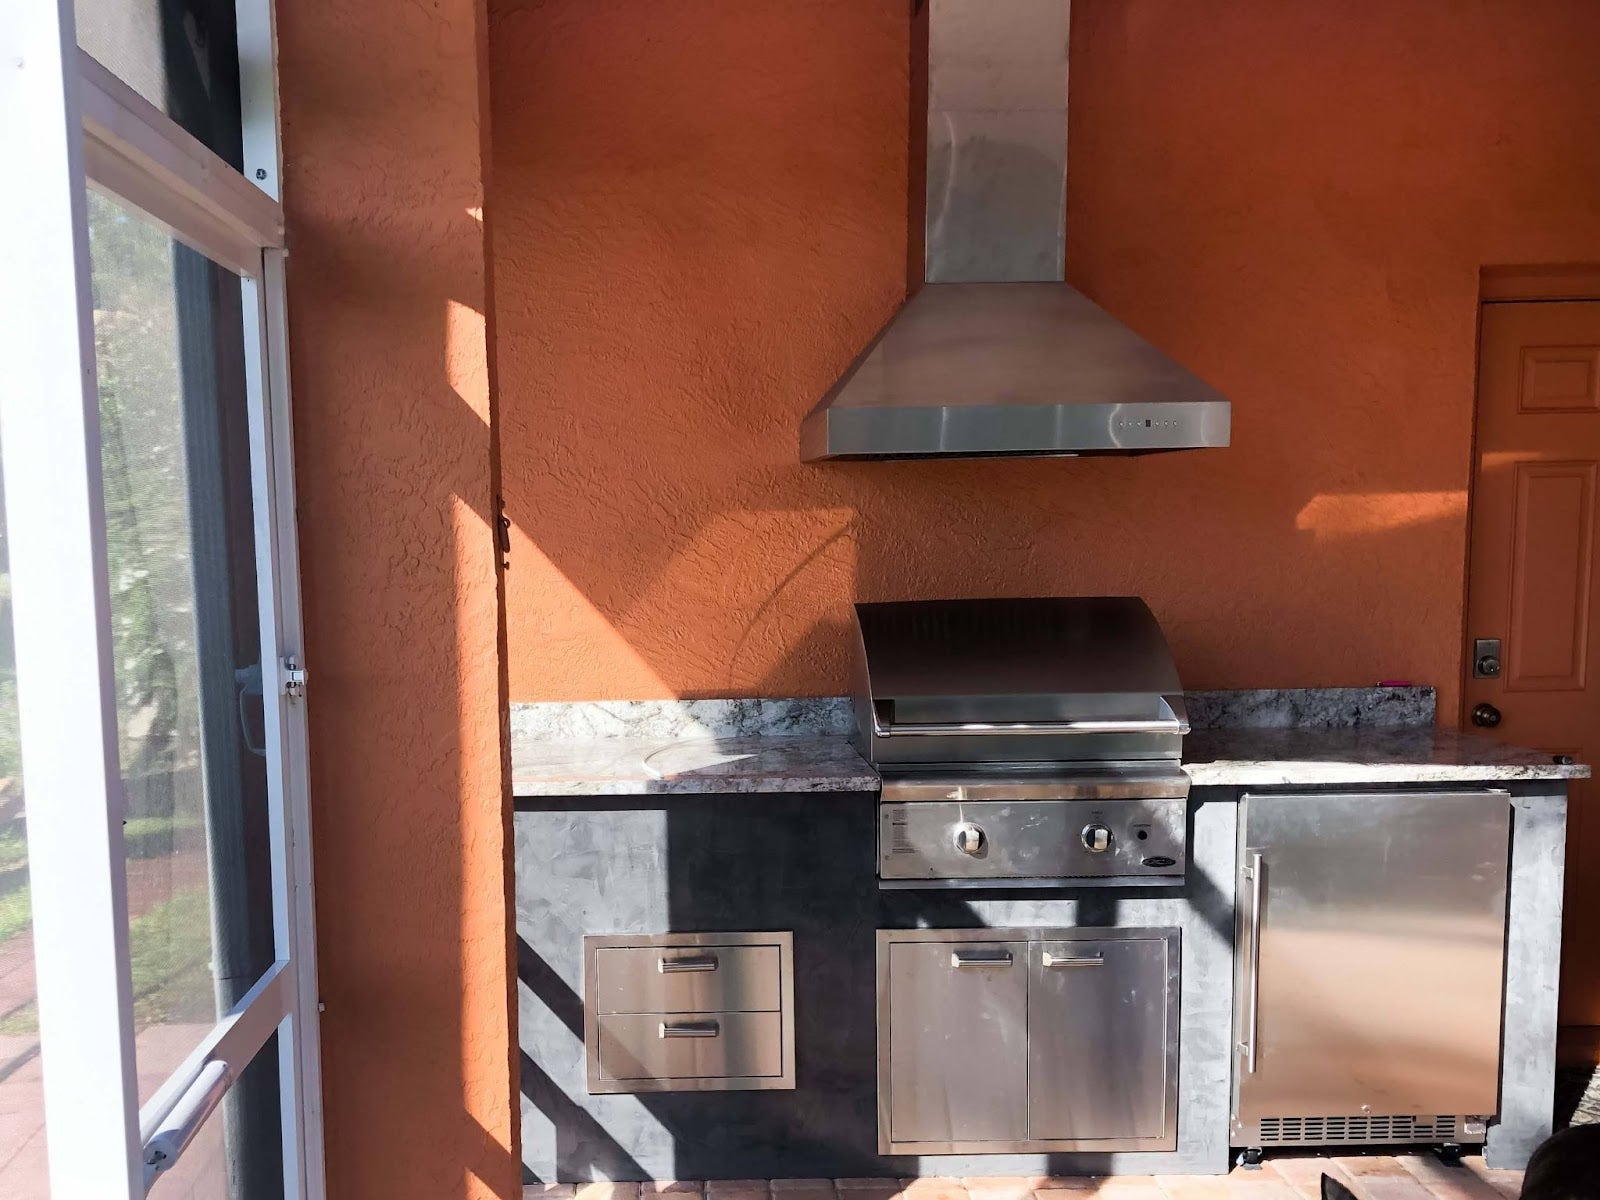 Compact outdoor kitchen with a stainless steel Proline range hood, grill, and storage on a screened-in porch with orange walls - prolinerangehoods.com